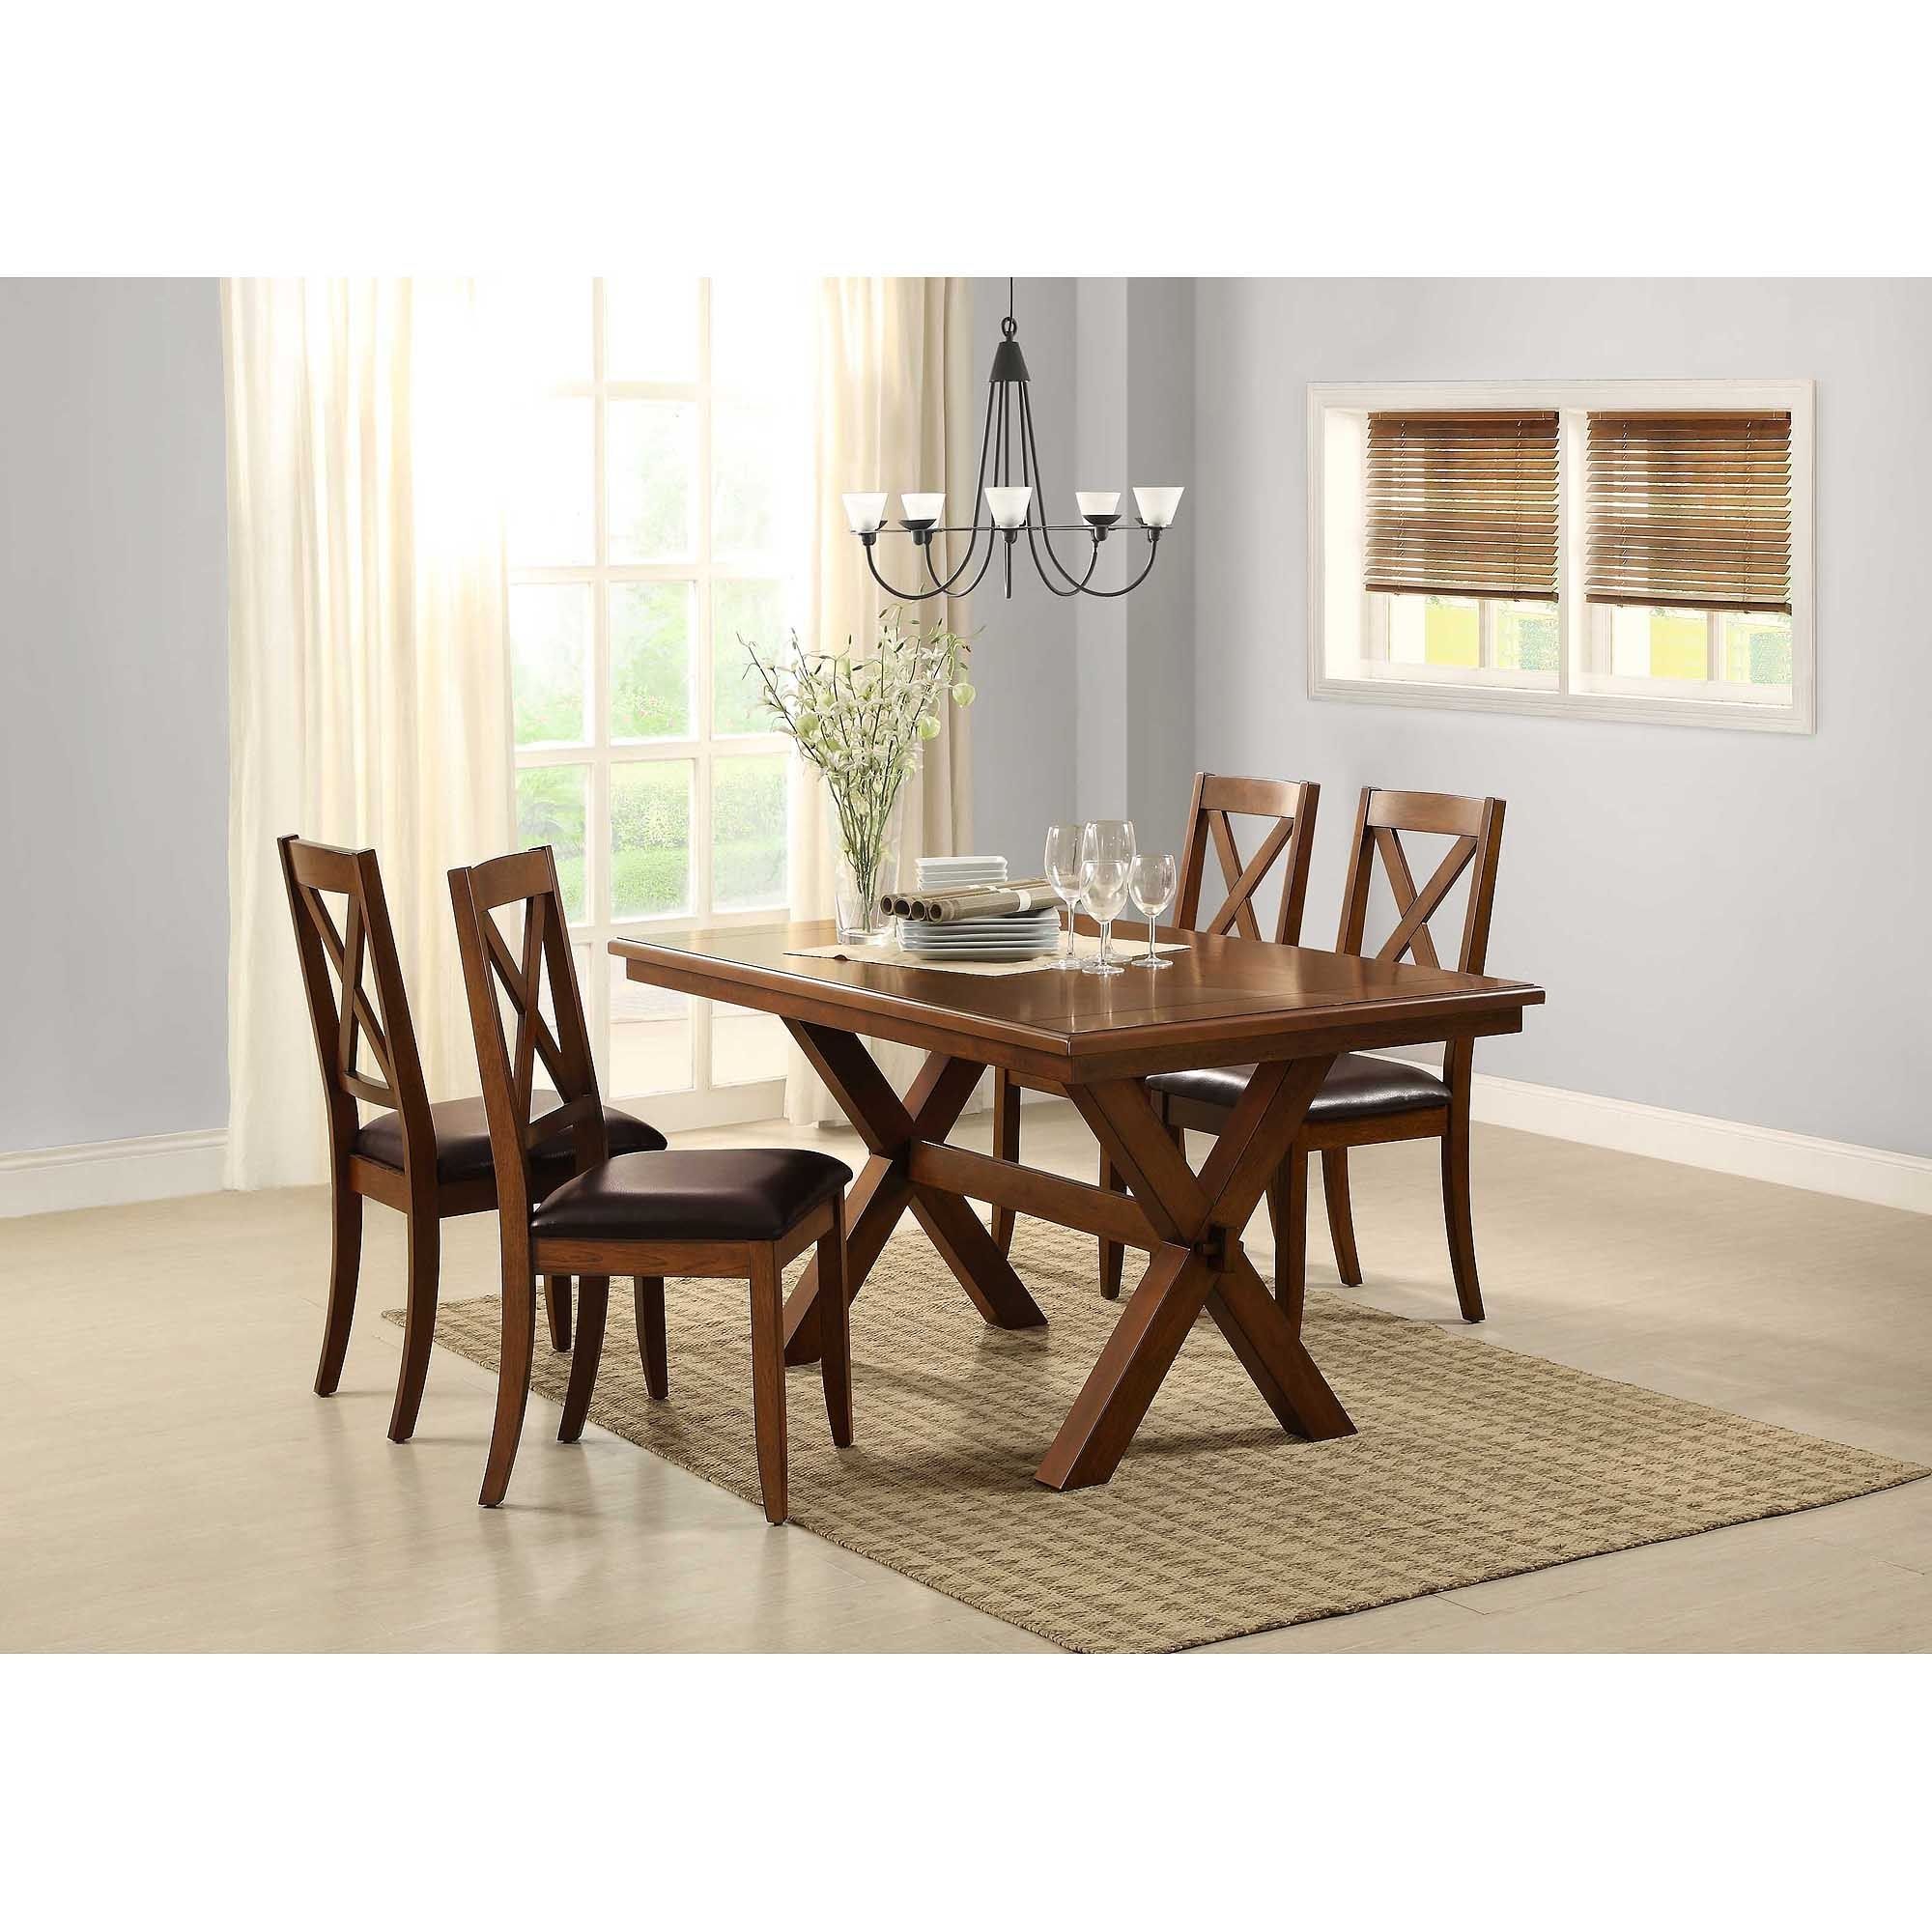 Better Homes & Gardens Maddox Crossing Dining Table, Brown – Walmart Pertaining To Current Garden Dining Tables And Chairs (Photo 22 of 25)